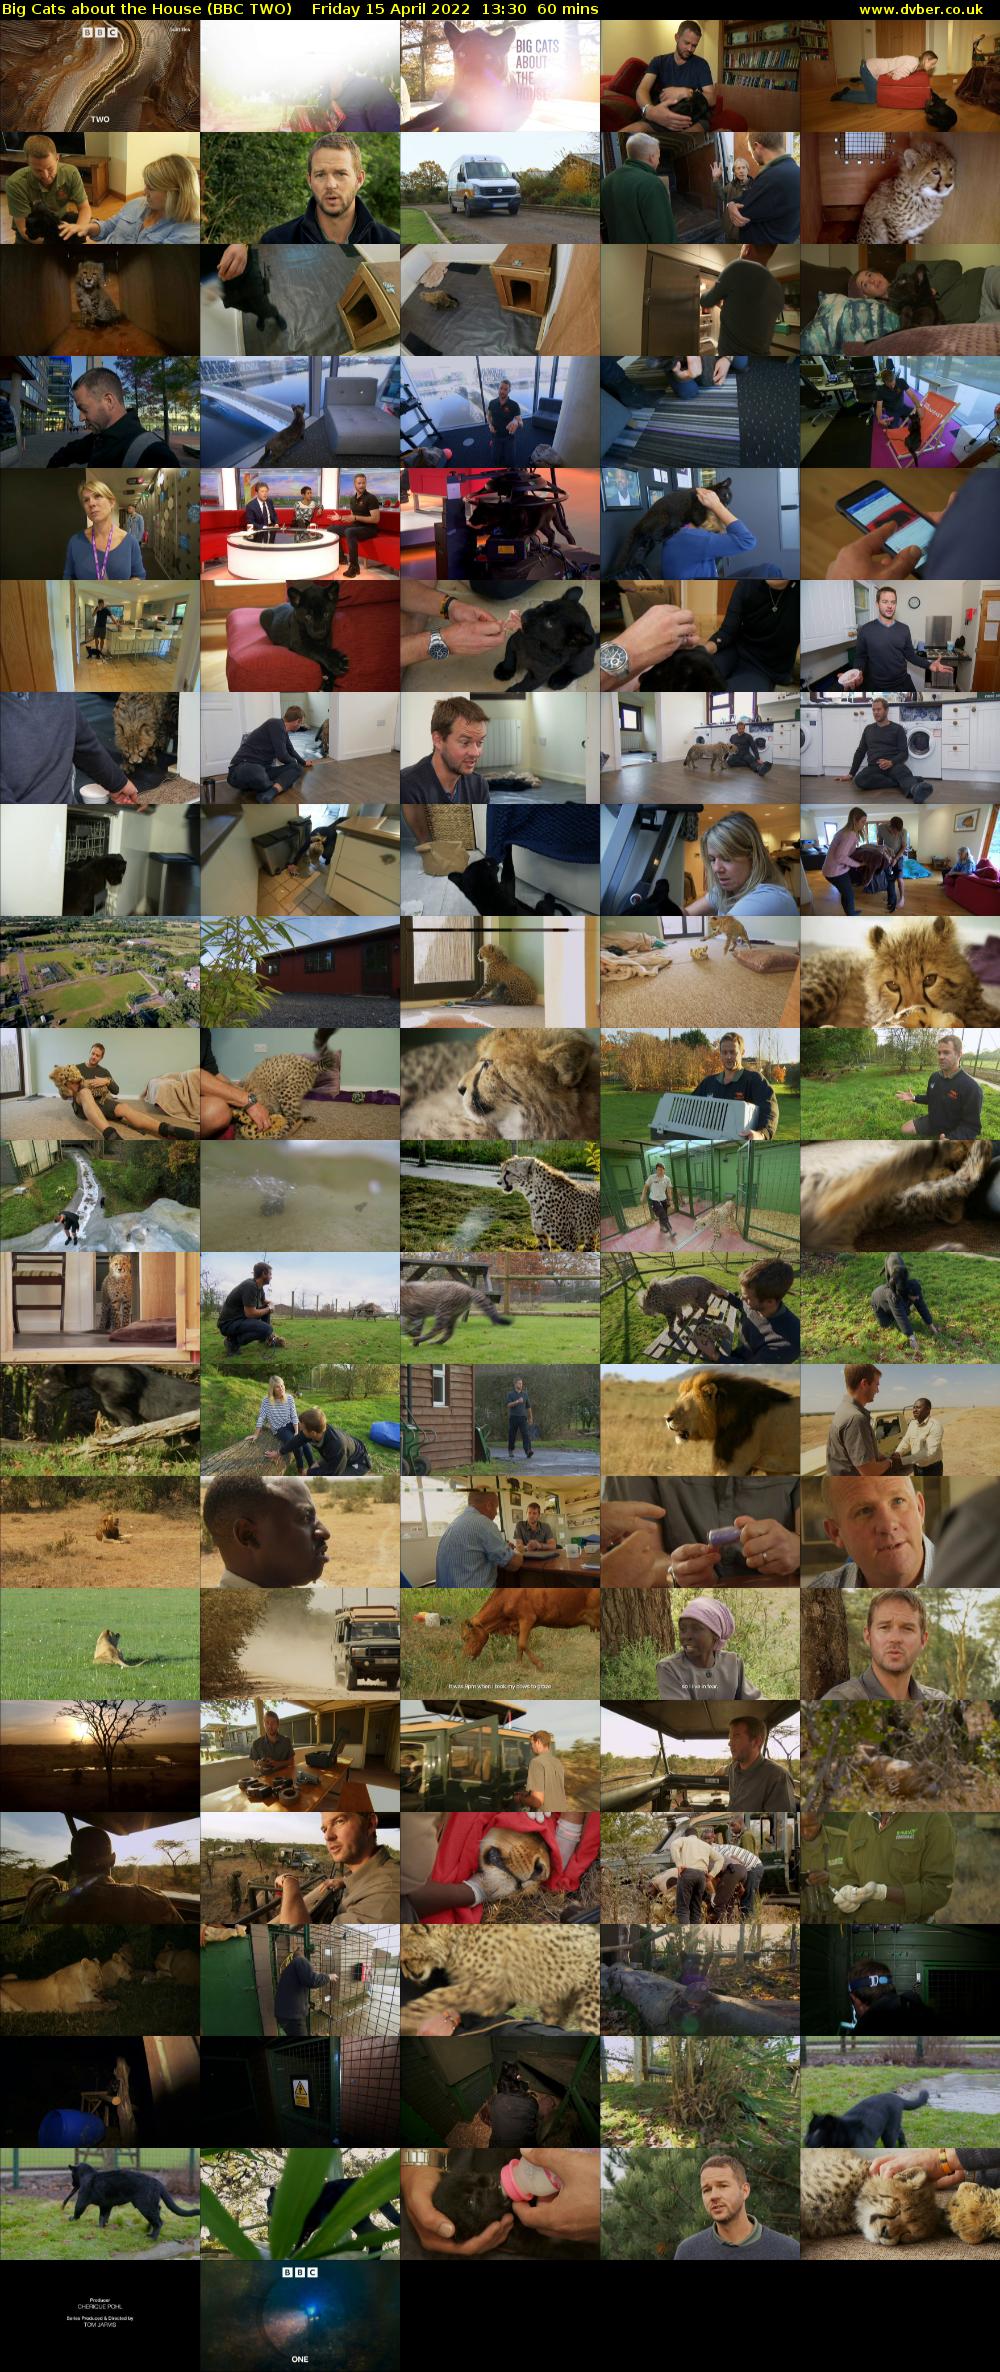 Big Cats About the House (BBC TWO) Friday 15 April 2022 13:30 - 14:30